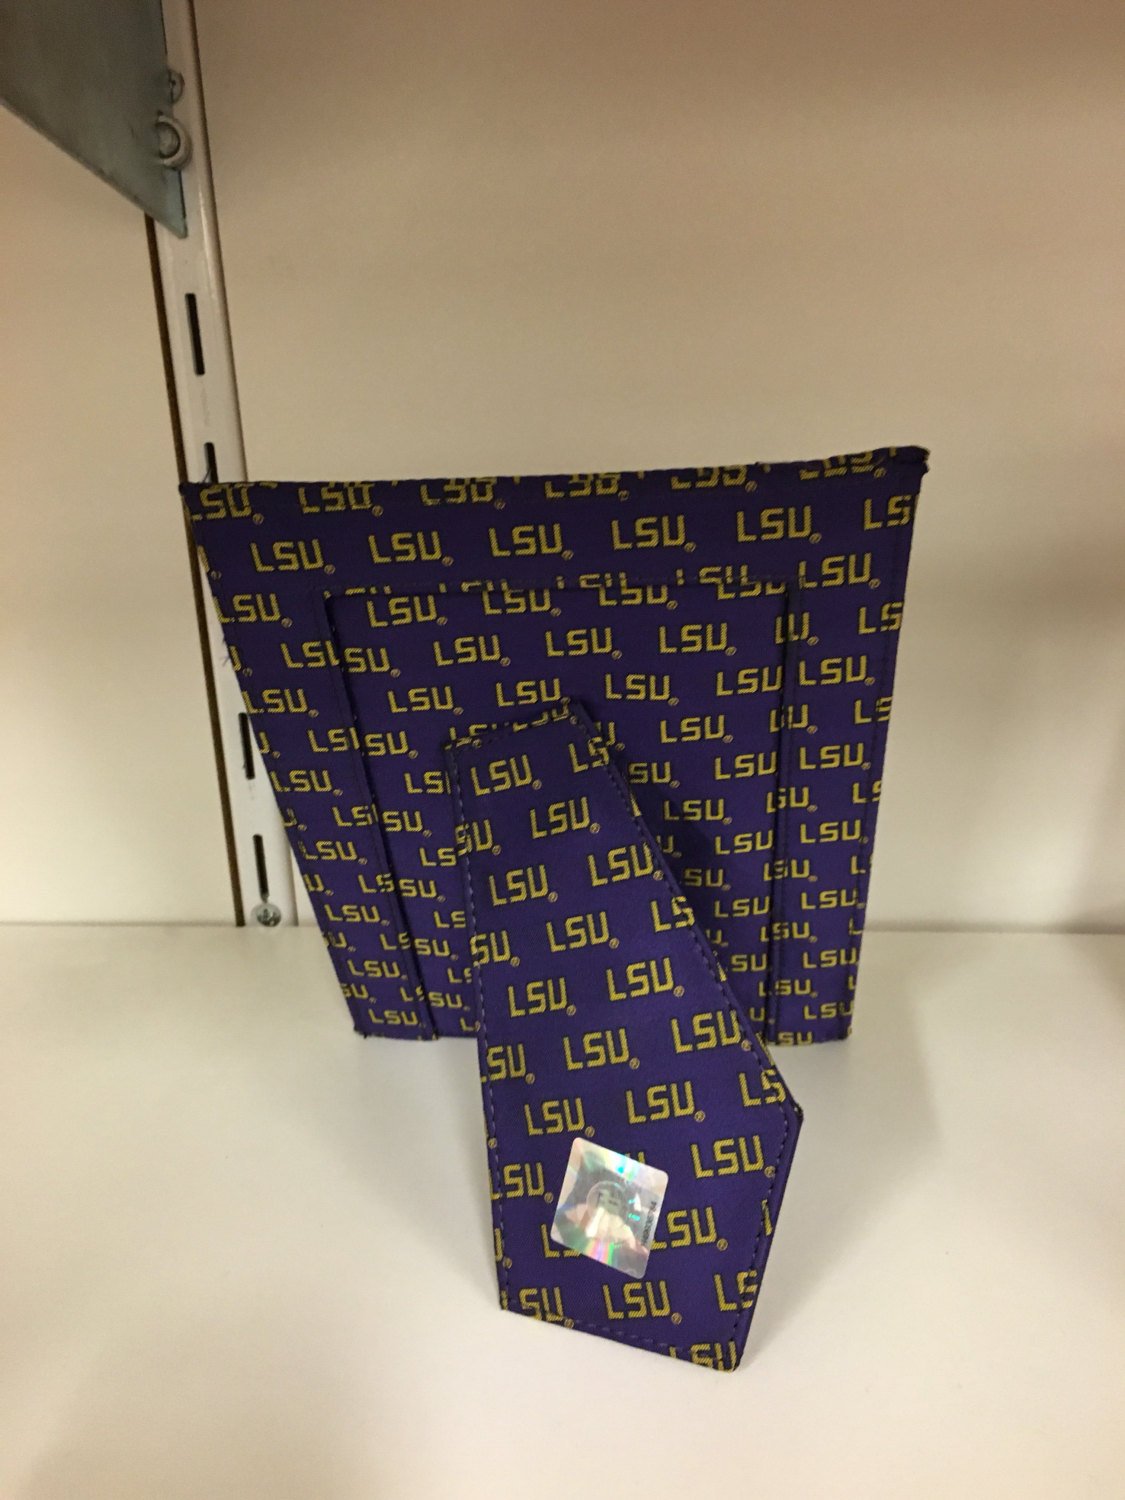 Louisiana State University LSU Tigers Picture Frame